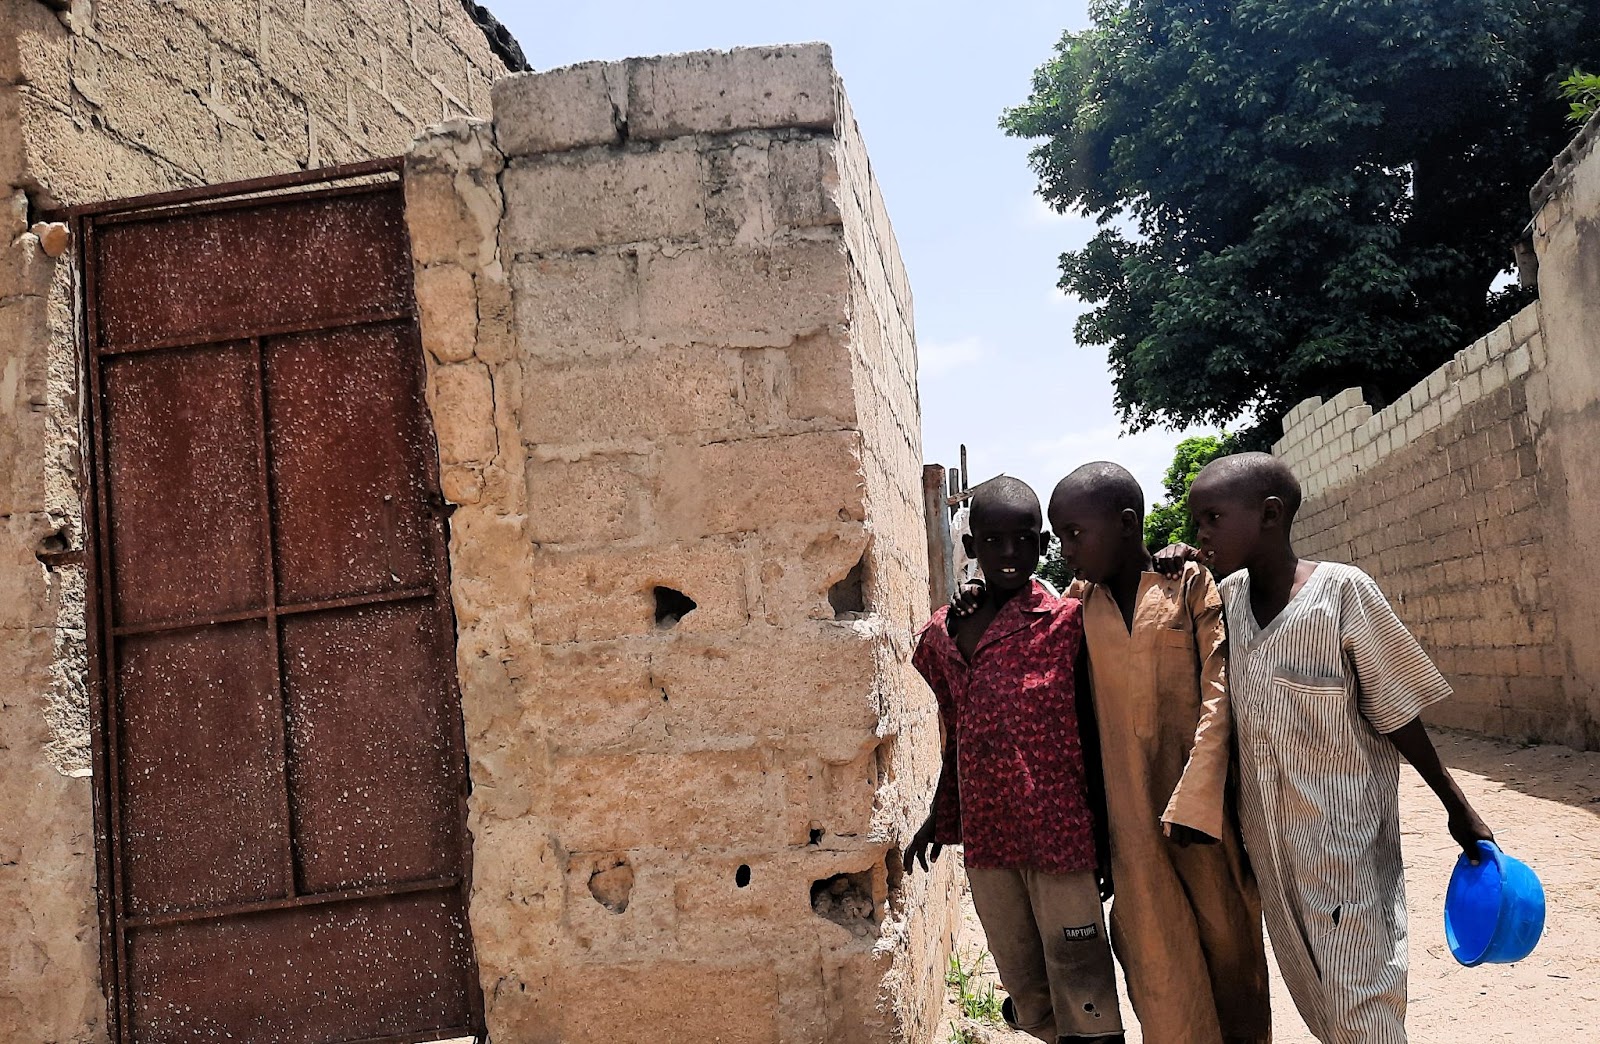 Three boys walking by a rusty door in a brick wall, one carrying a blue container.